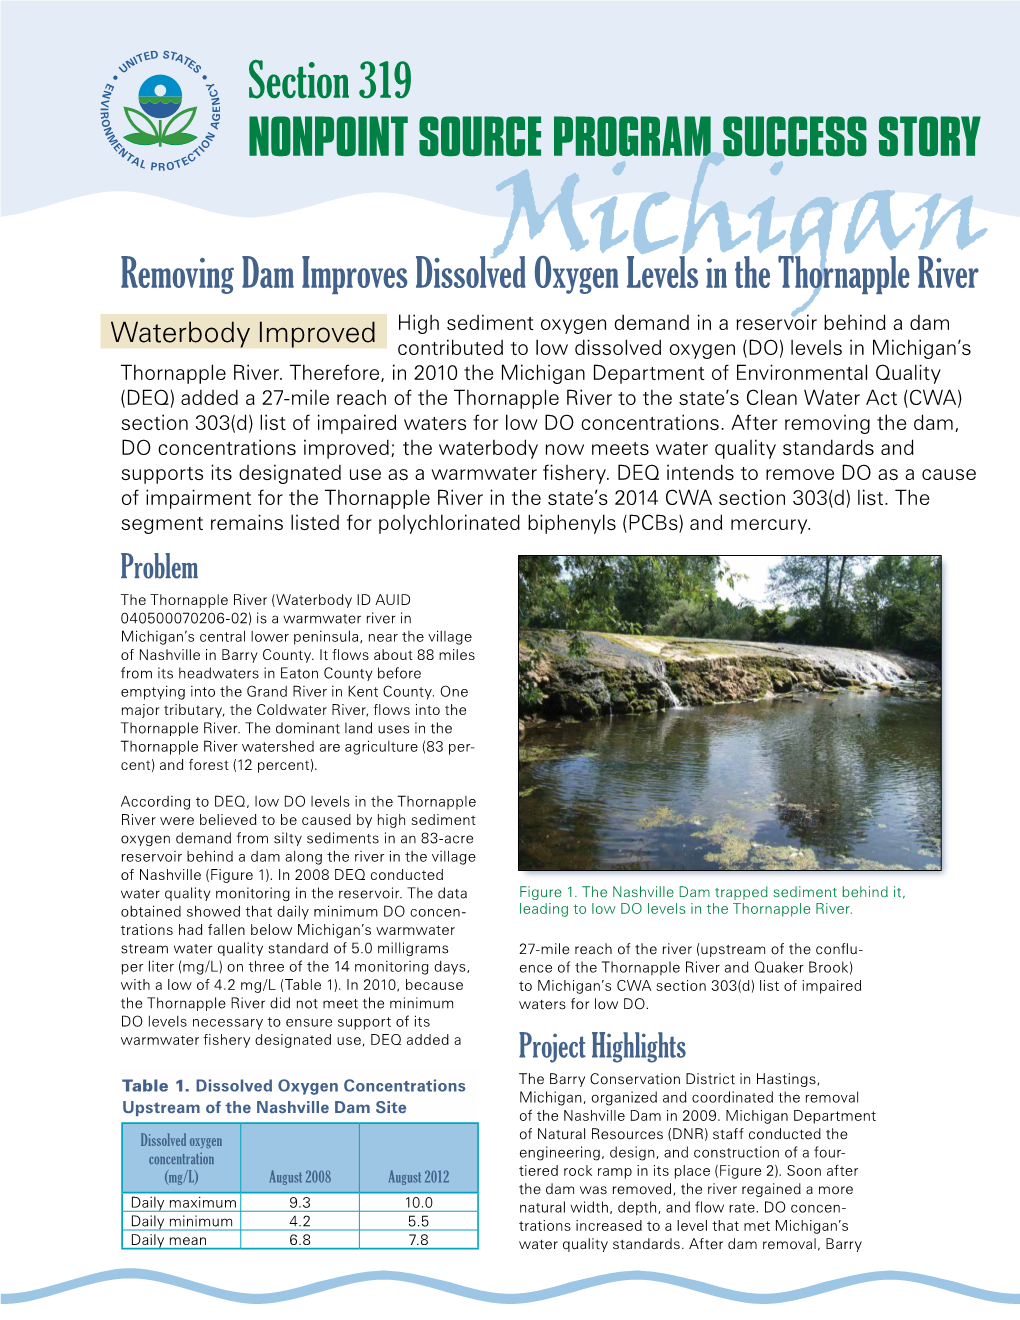 Michigan's Thornapple River Section 319 Success Story